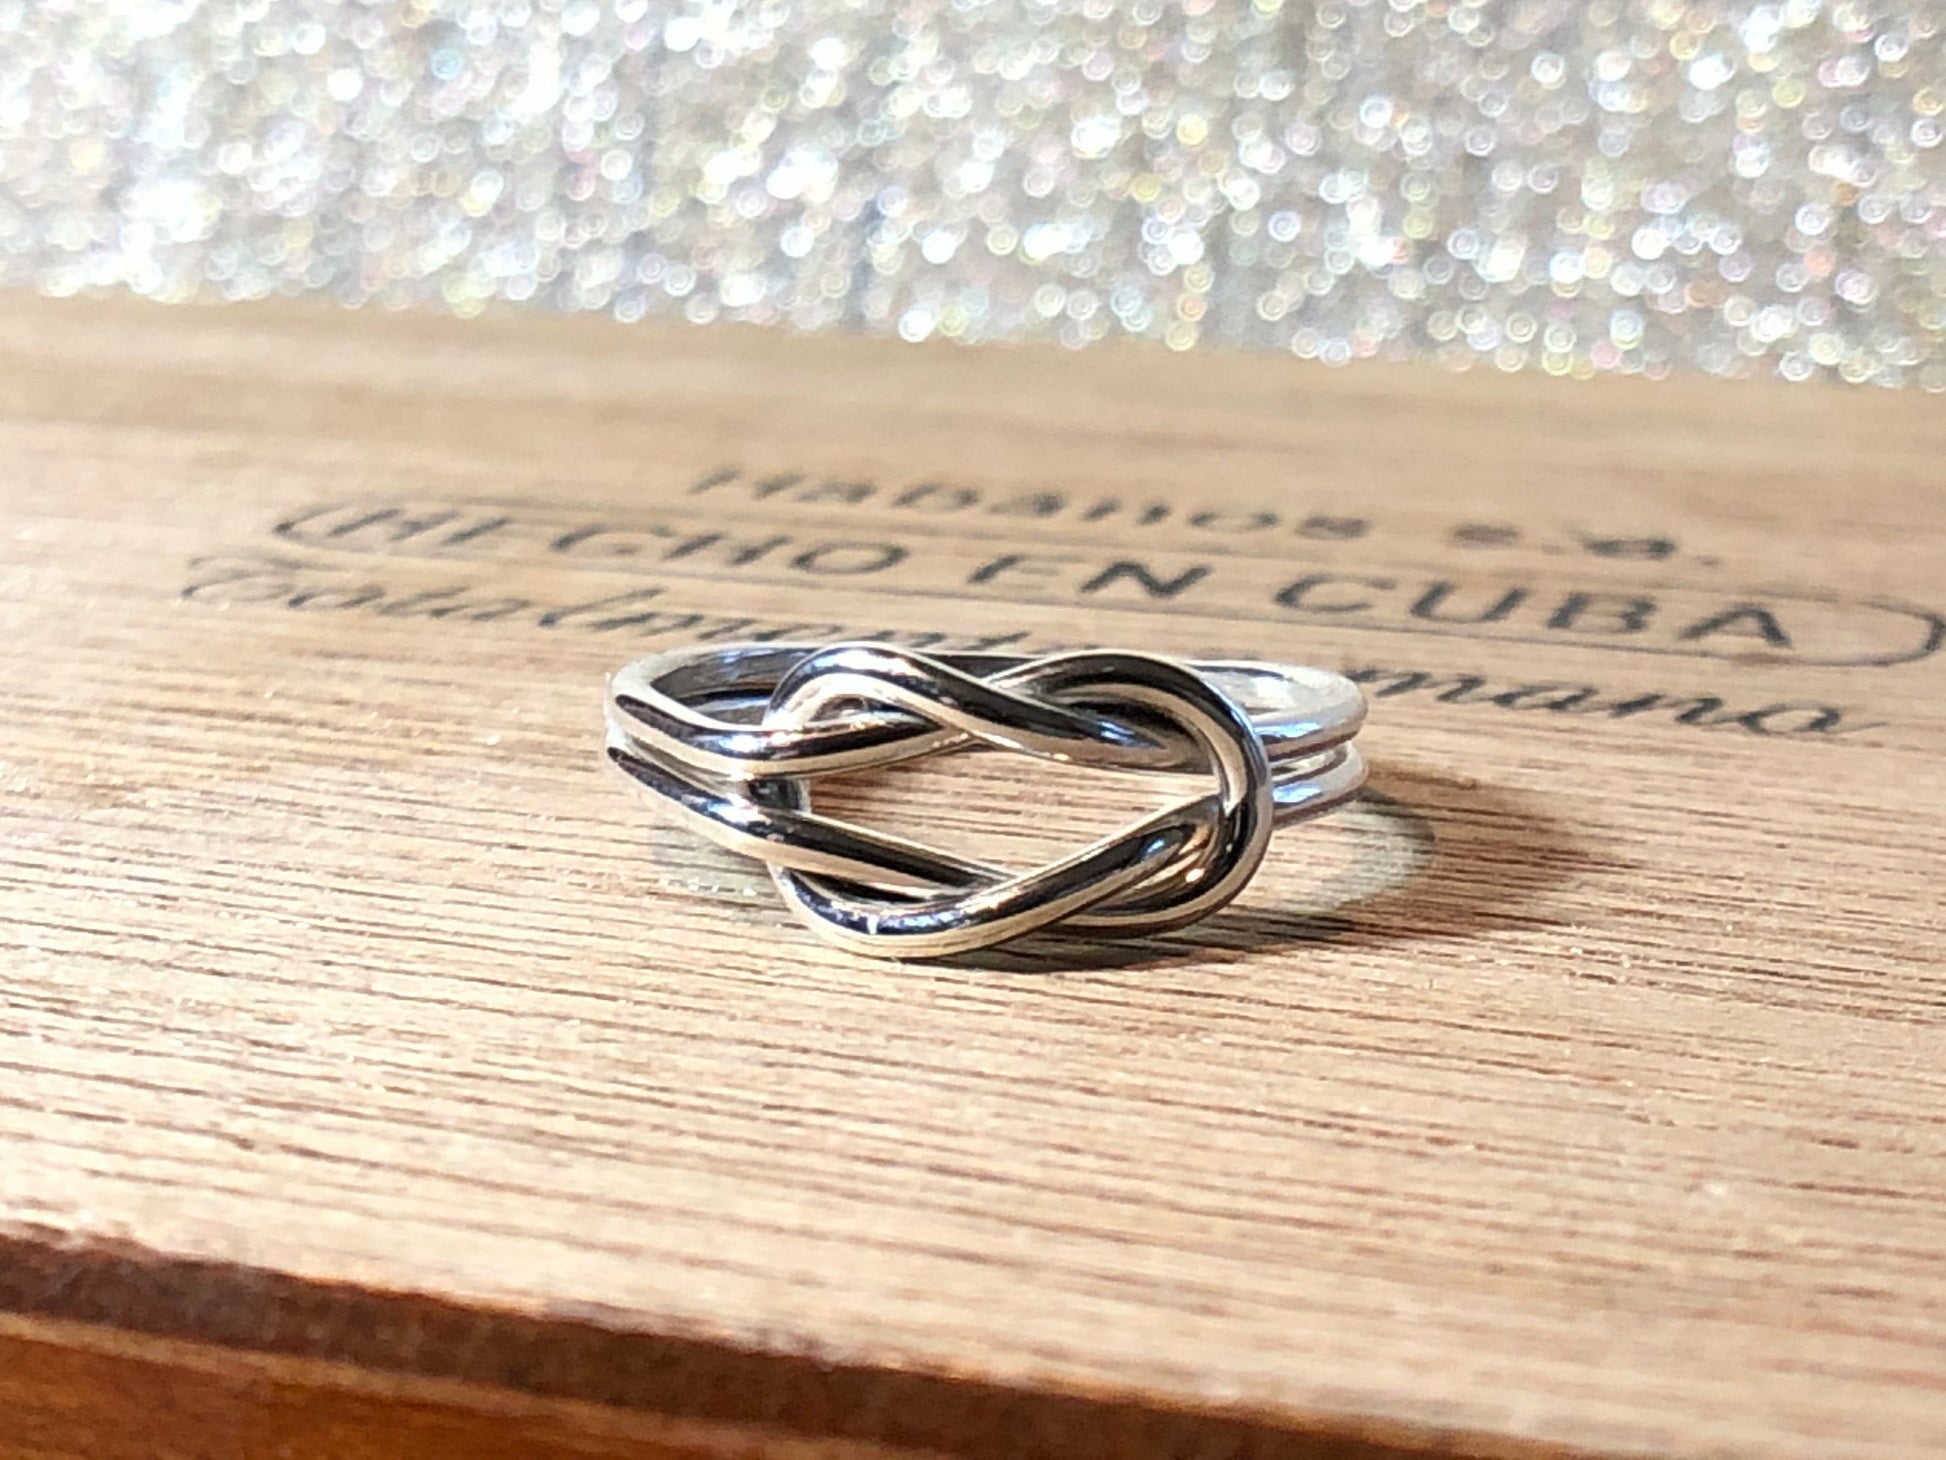 sterling-silver-knot-ring-sterling-silver-ring-tie-the-knot-ring-love-jewelry-infinity-ring-bridesmaid-gift-valentines-day-gift-gift-for-her